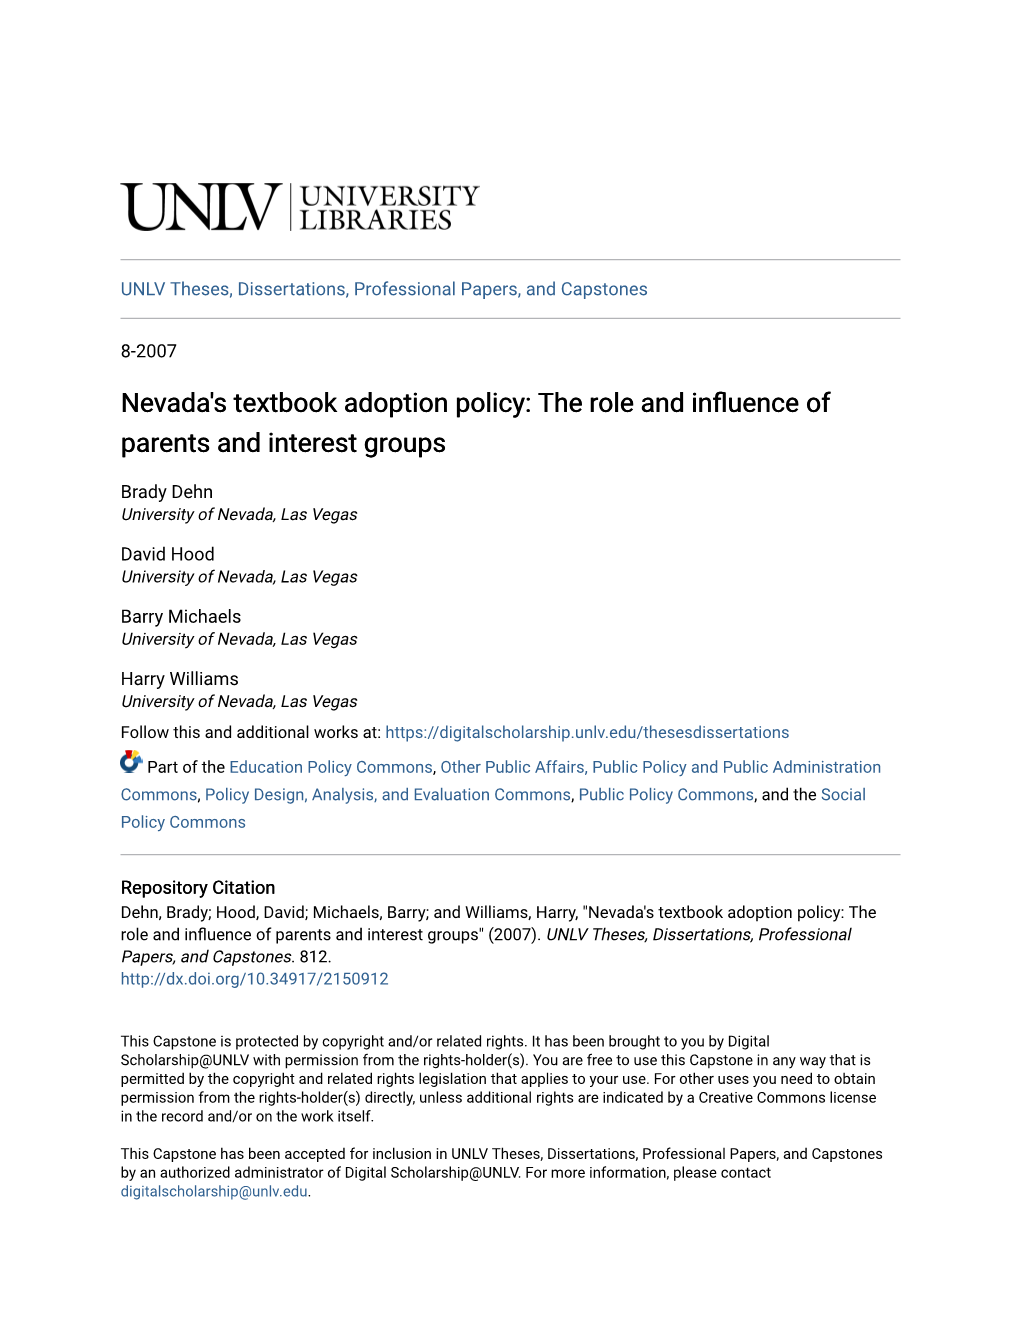 Nevada's Textbook Adoption Policy: the Role and Influence of Parents and Interest Groups